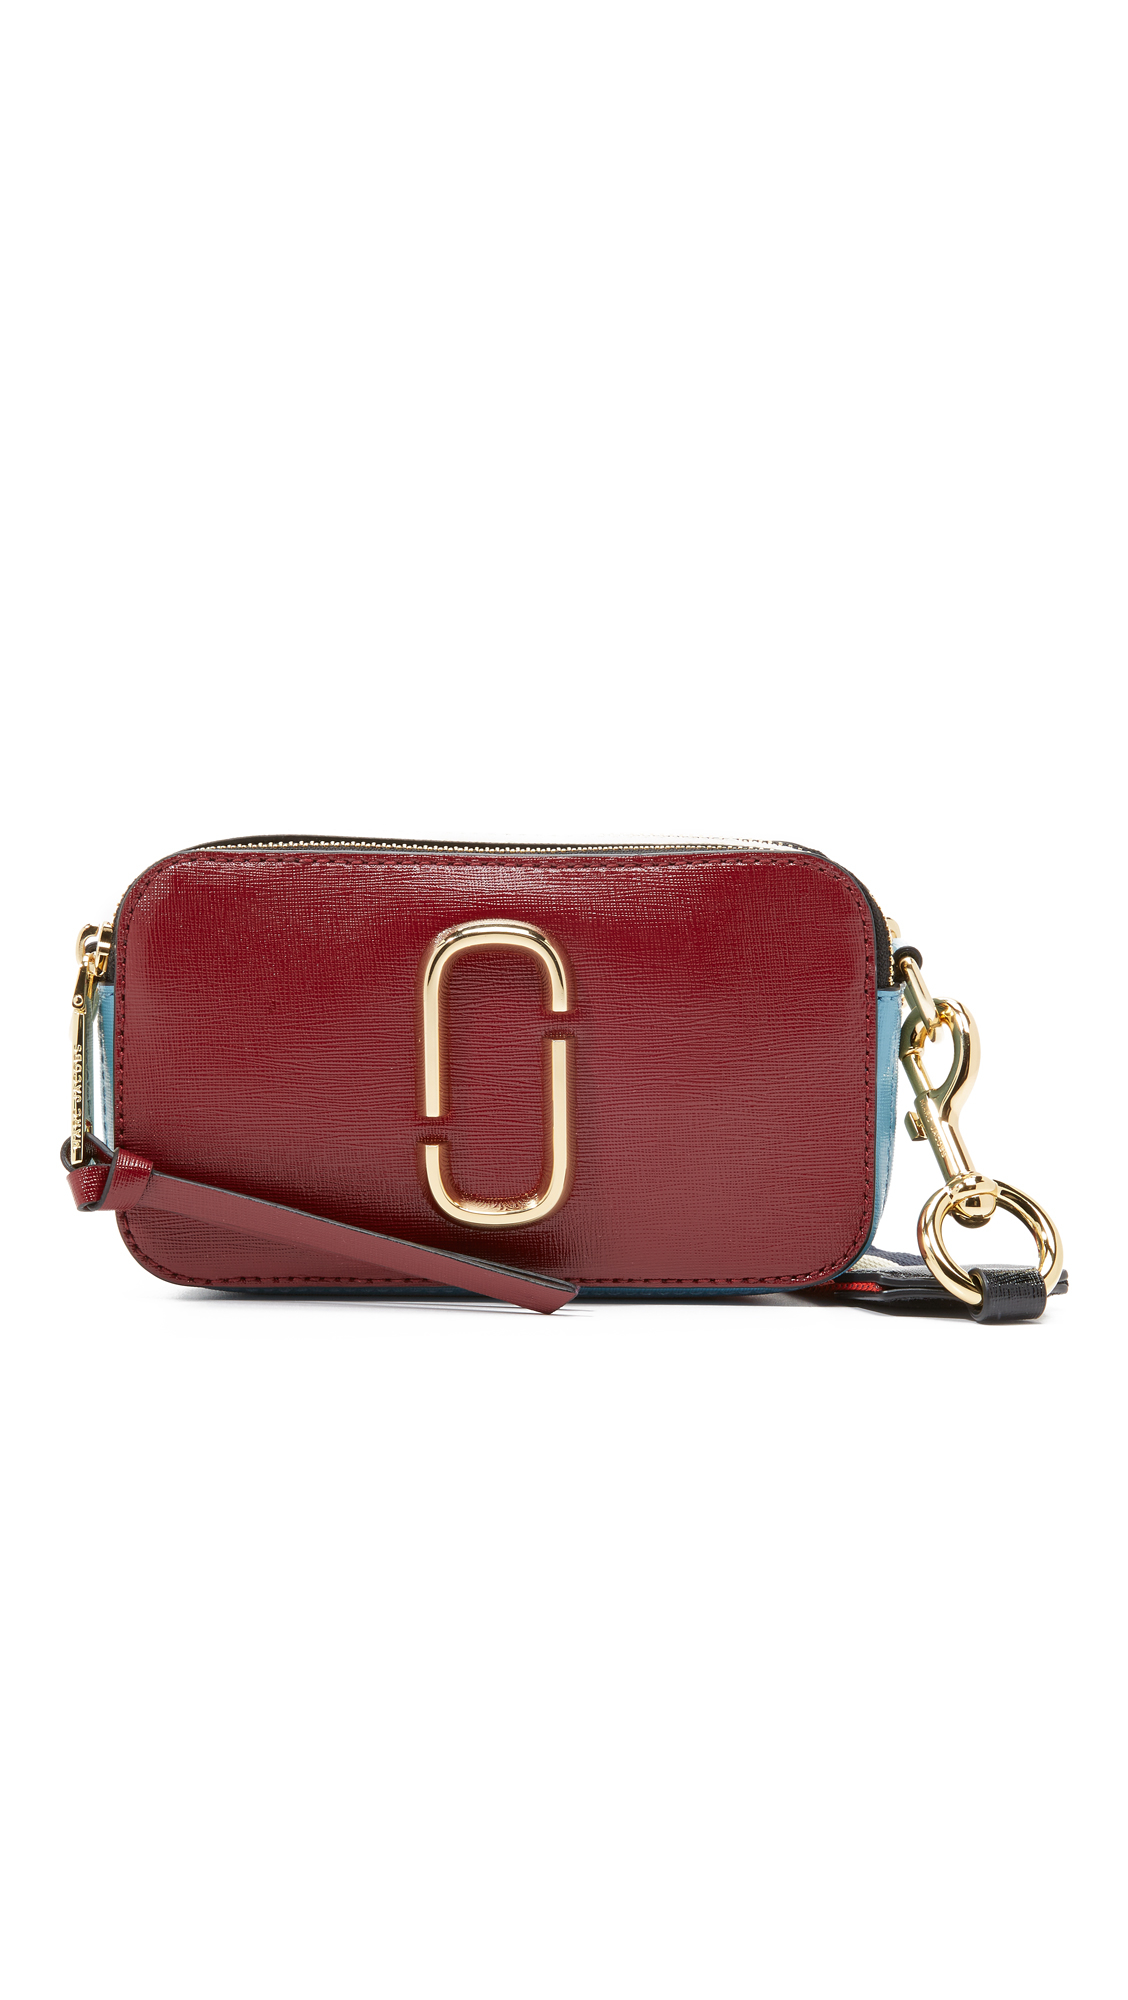 Lyst - Marc Jacobs Snapshot Colorblock Camera Bag in Red